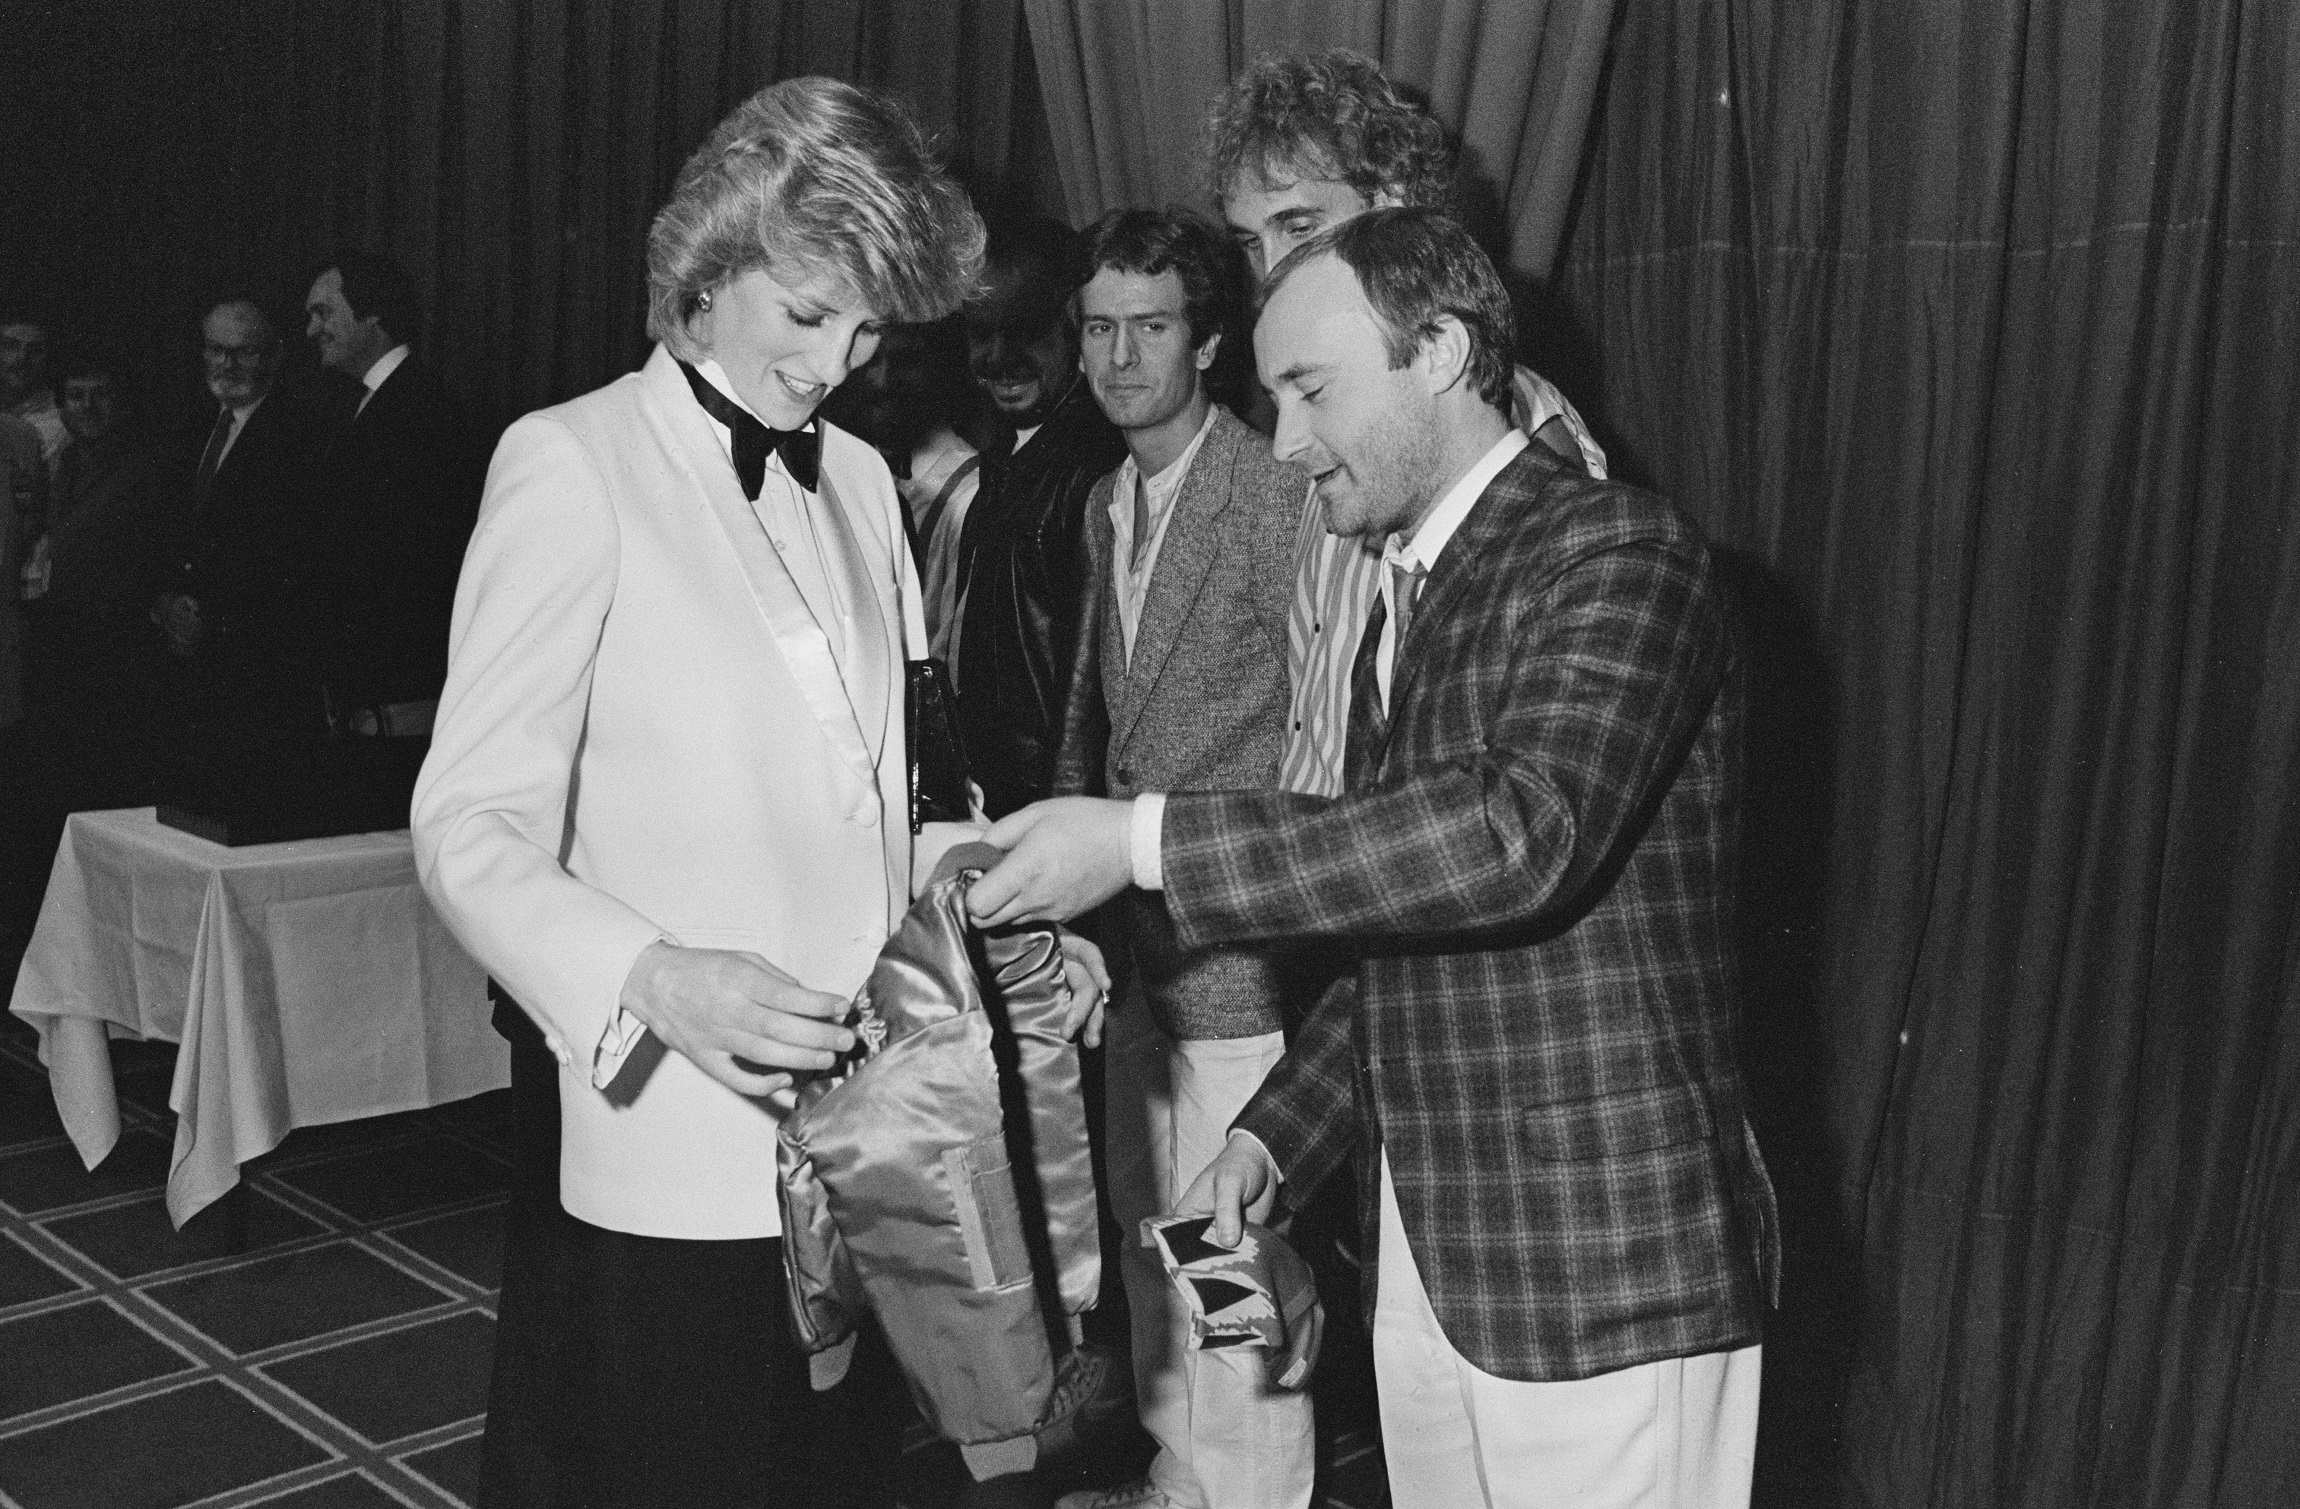 Diana, Princess of Wales (1961 - 1997) accepts a jacket with an embroidered gold crown for Prince William from British singer and drummer Phil Collins of rock band Genesis, before the band gave a Royal charity concert at the National Exhibition Centre, Birmingham, UK, 2nd March 1984. (Photo by Steve Wood/Daily Express/Hulton Archive/Getty Images)